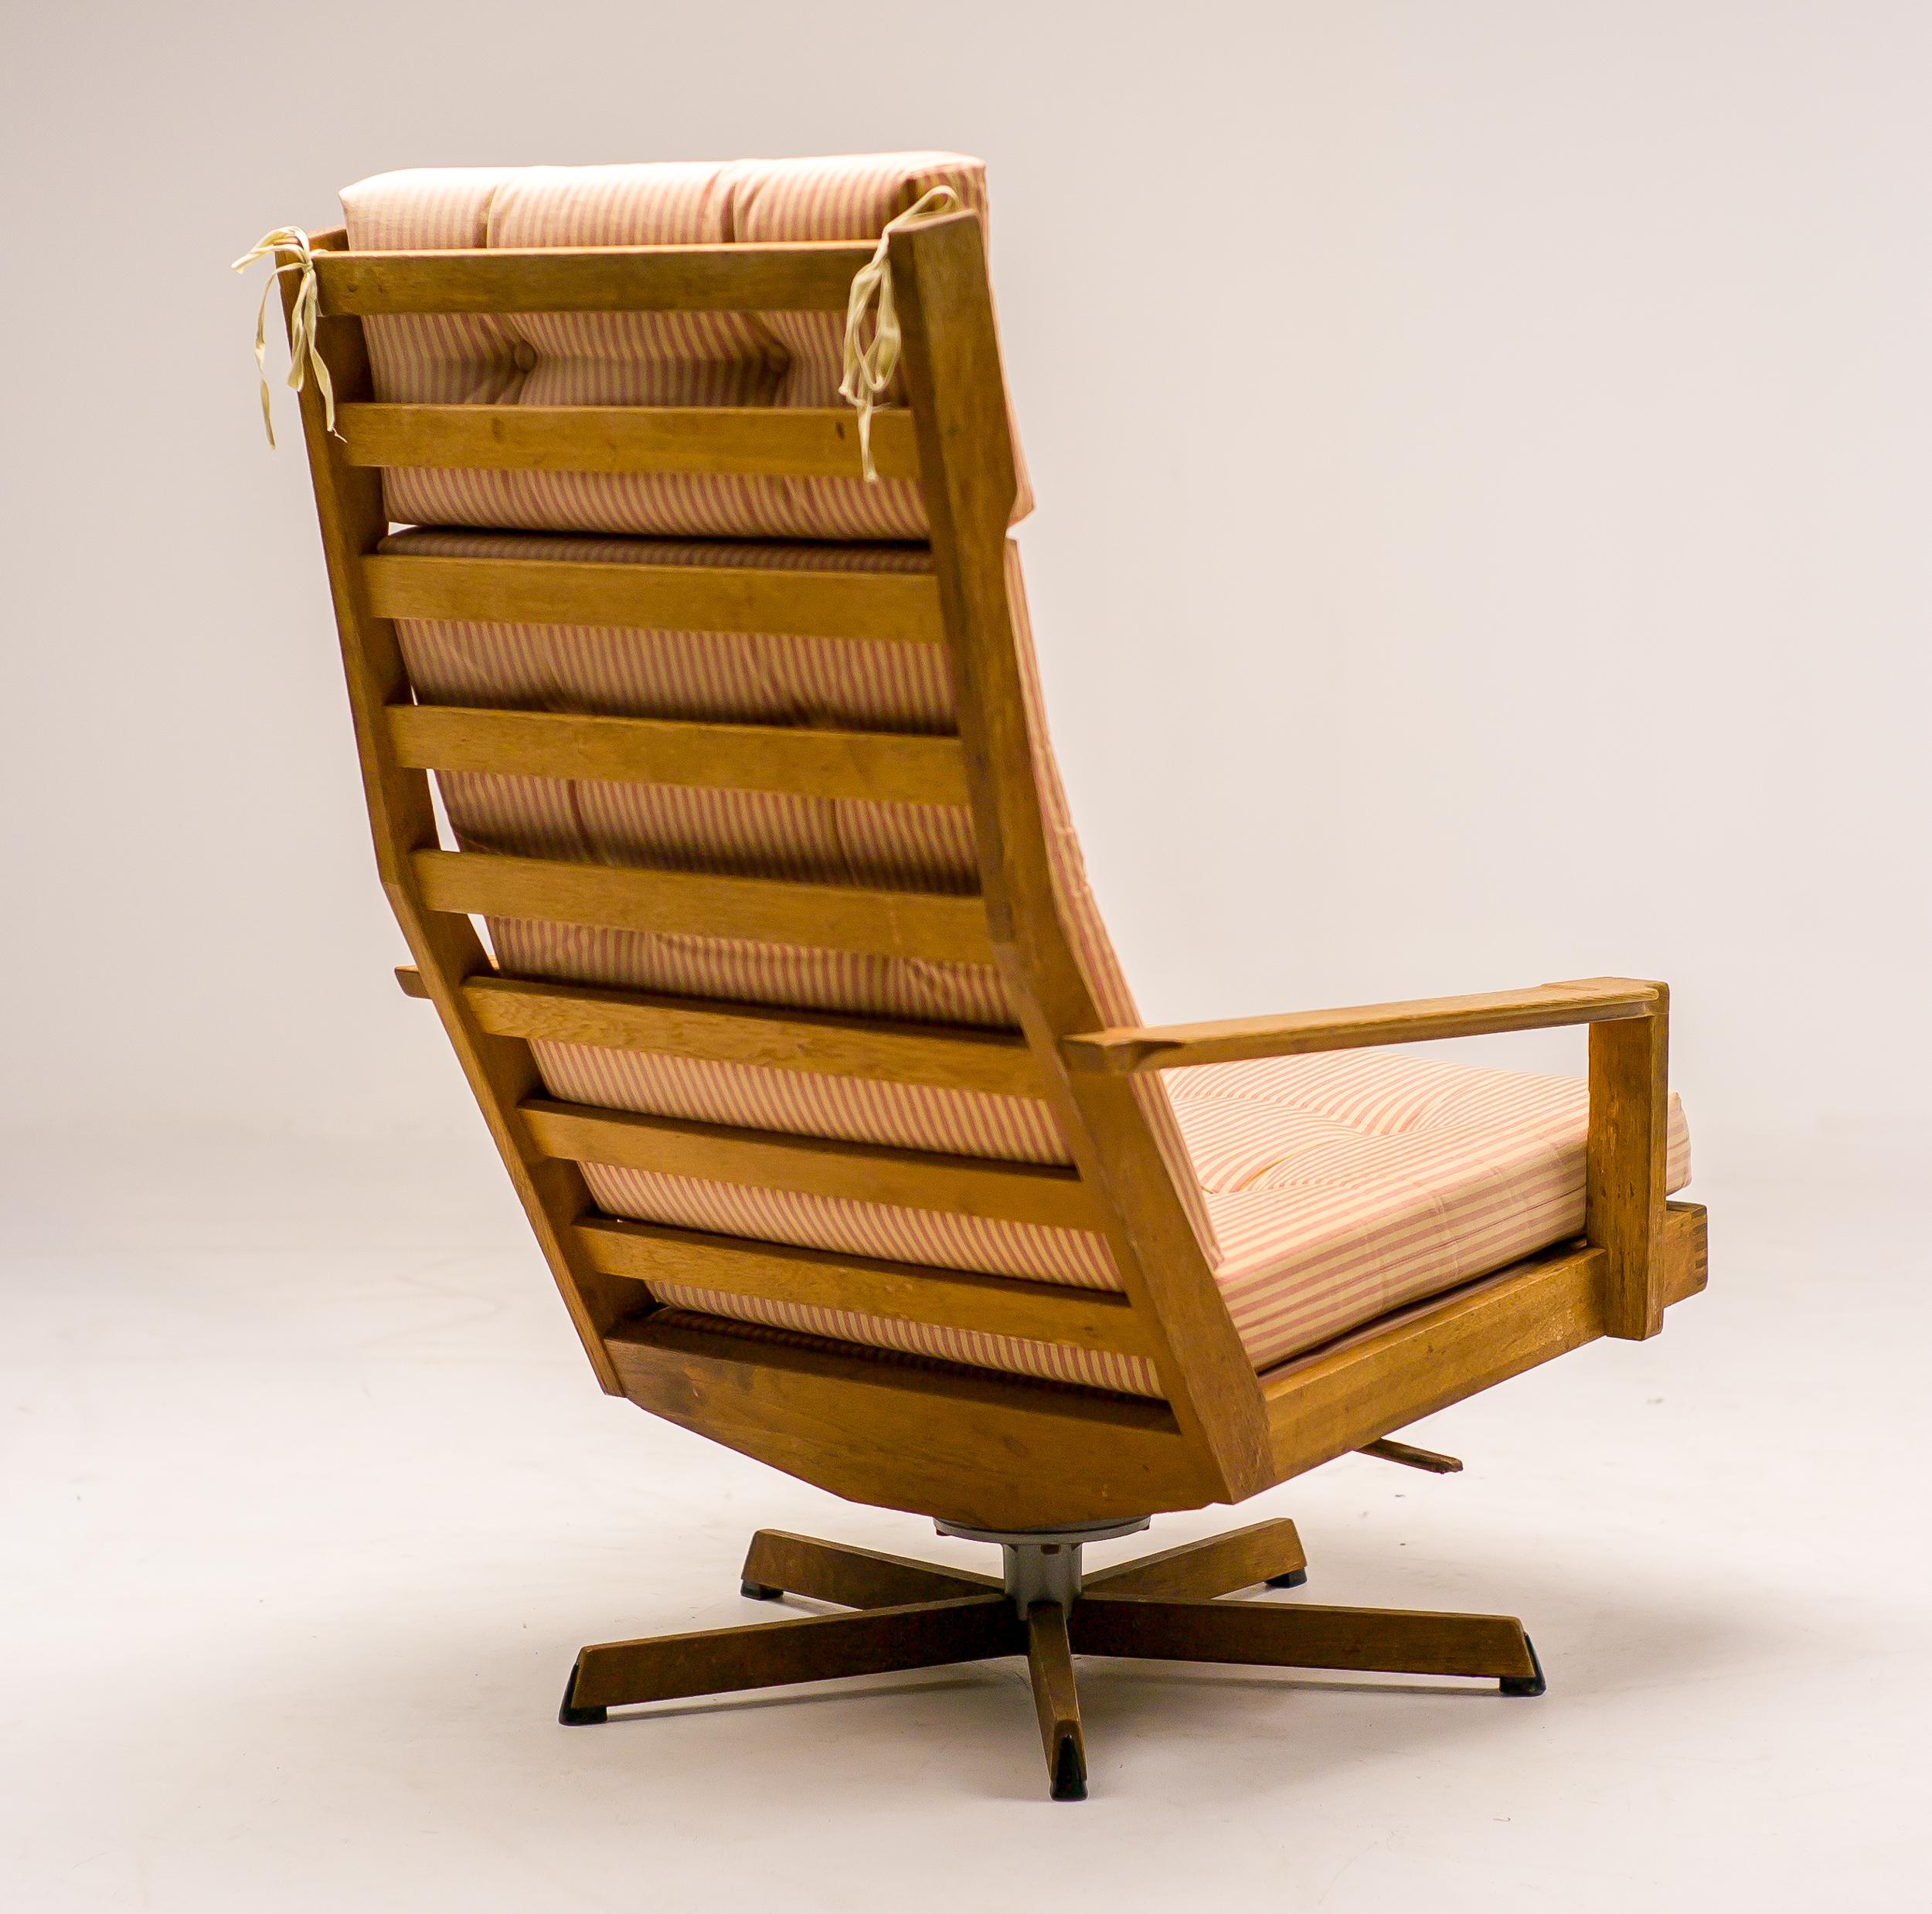 Rare Scandinavian Modern oak lounge chair with tilt/swivel and five-star oak base, designed by Henry Schubell. Beautiful construction with dovetail joints. 
Original striped cotton fabric in nice vintage condition.

Henry Hans Schubell was born